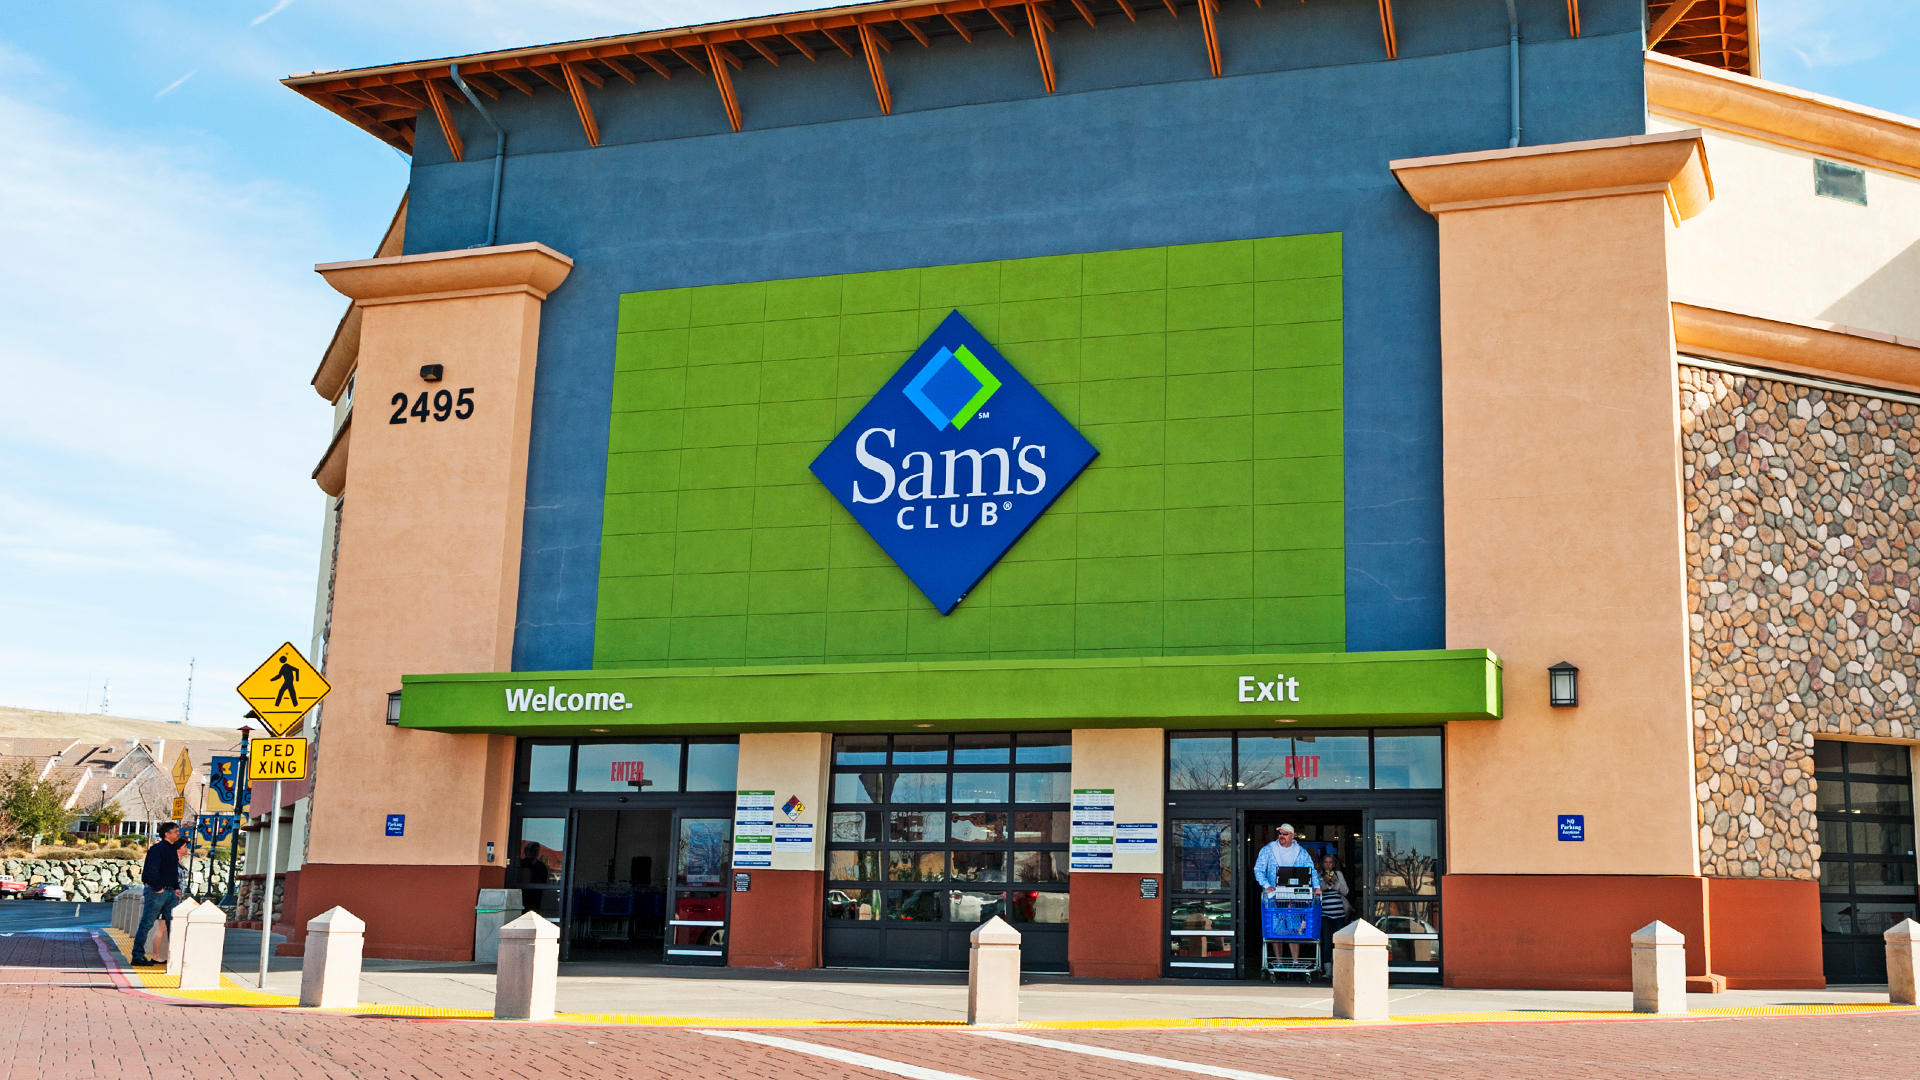 ‘Clearly no quality control,’ fumes Sam’s Club member after finding mold for 4th time this year – chain didn’t apologize [Video]